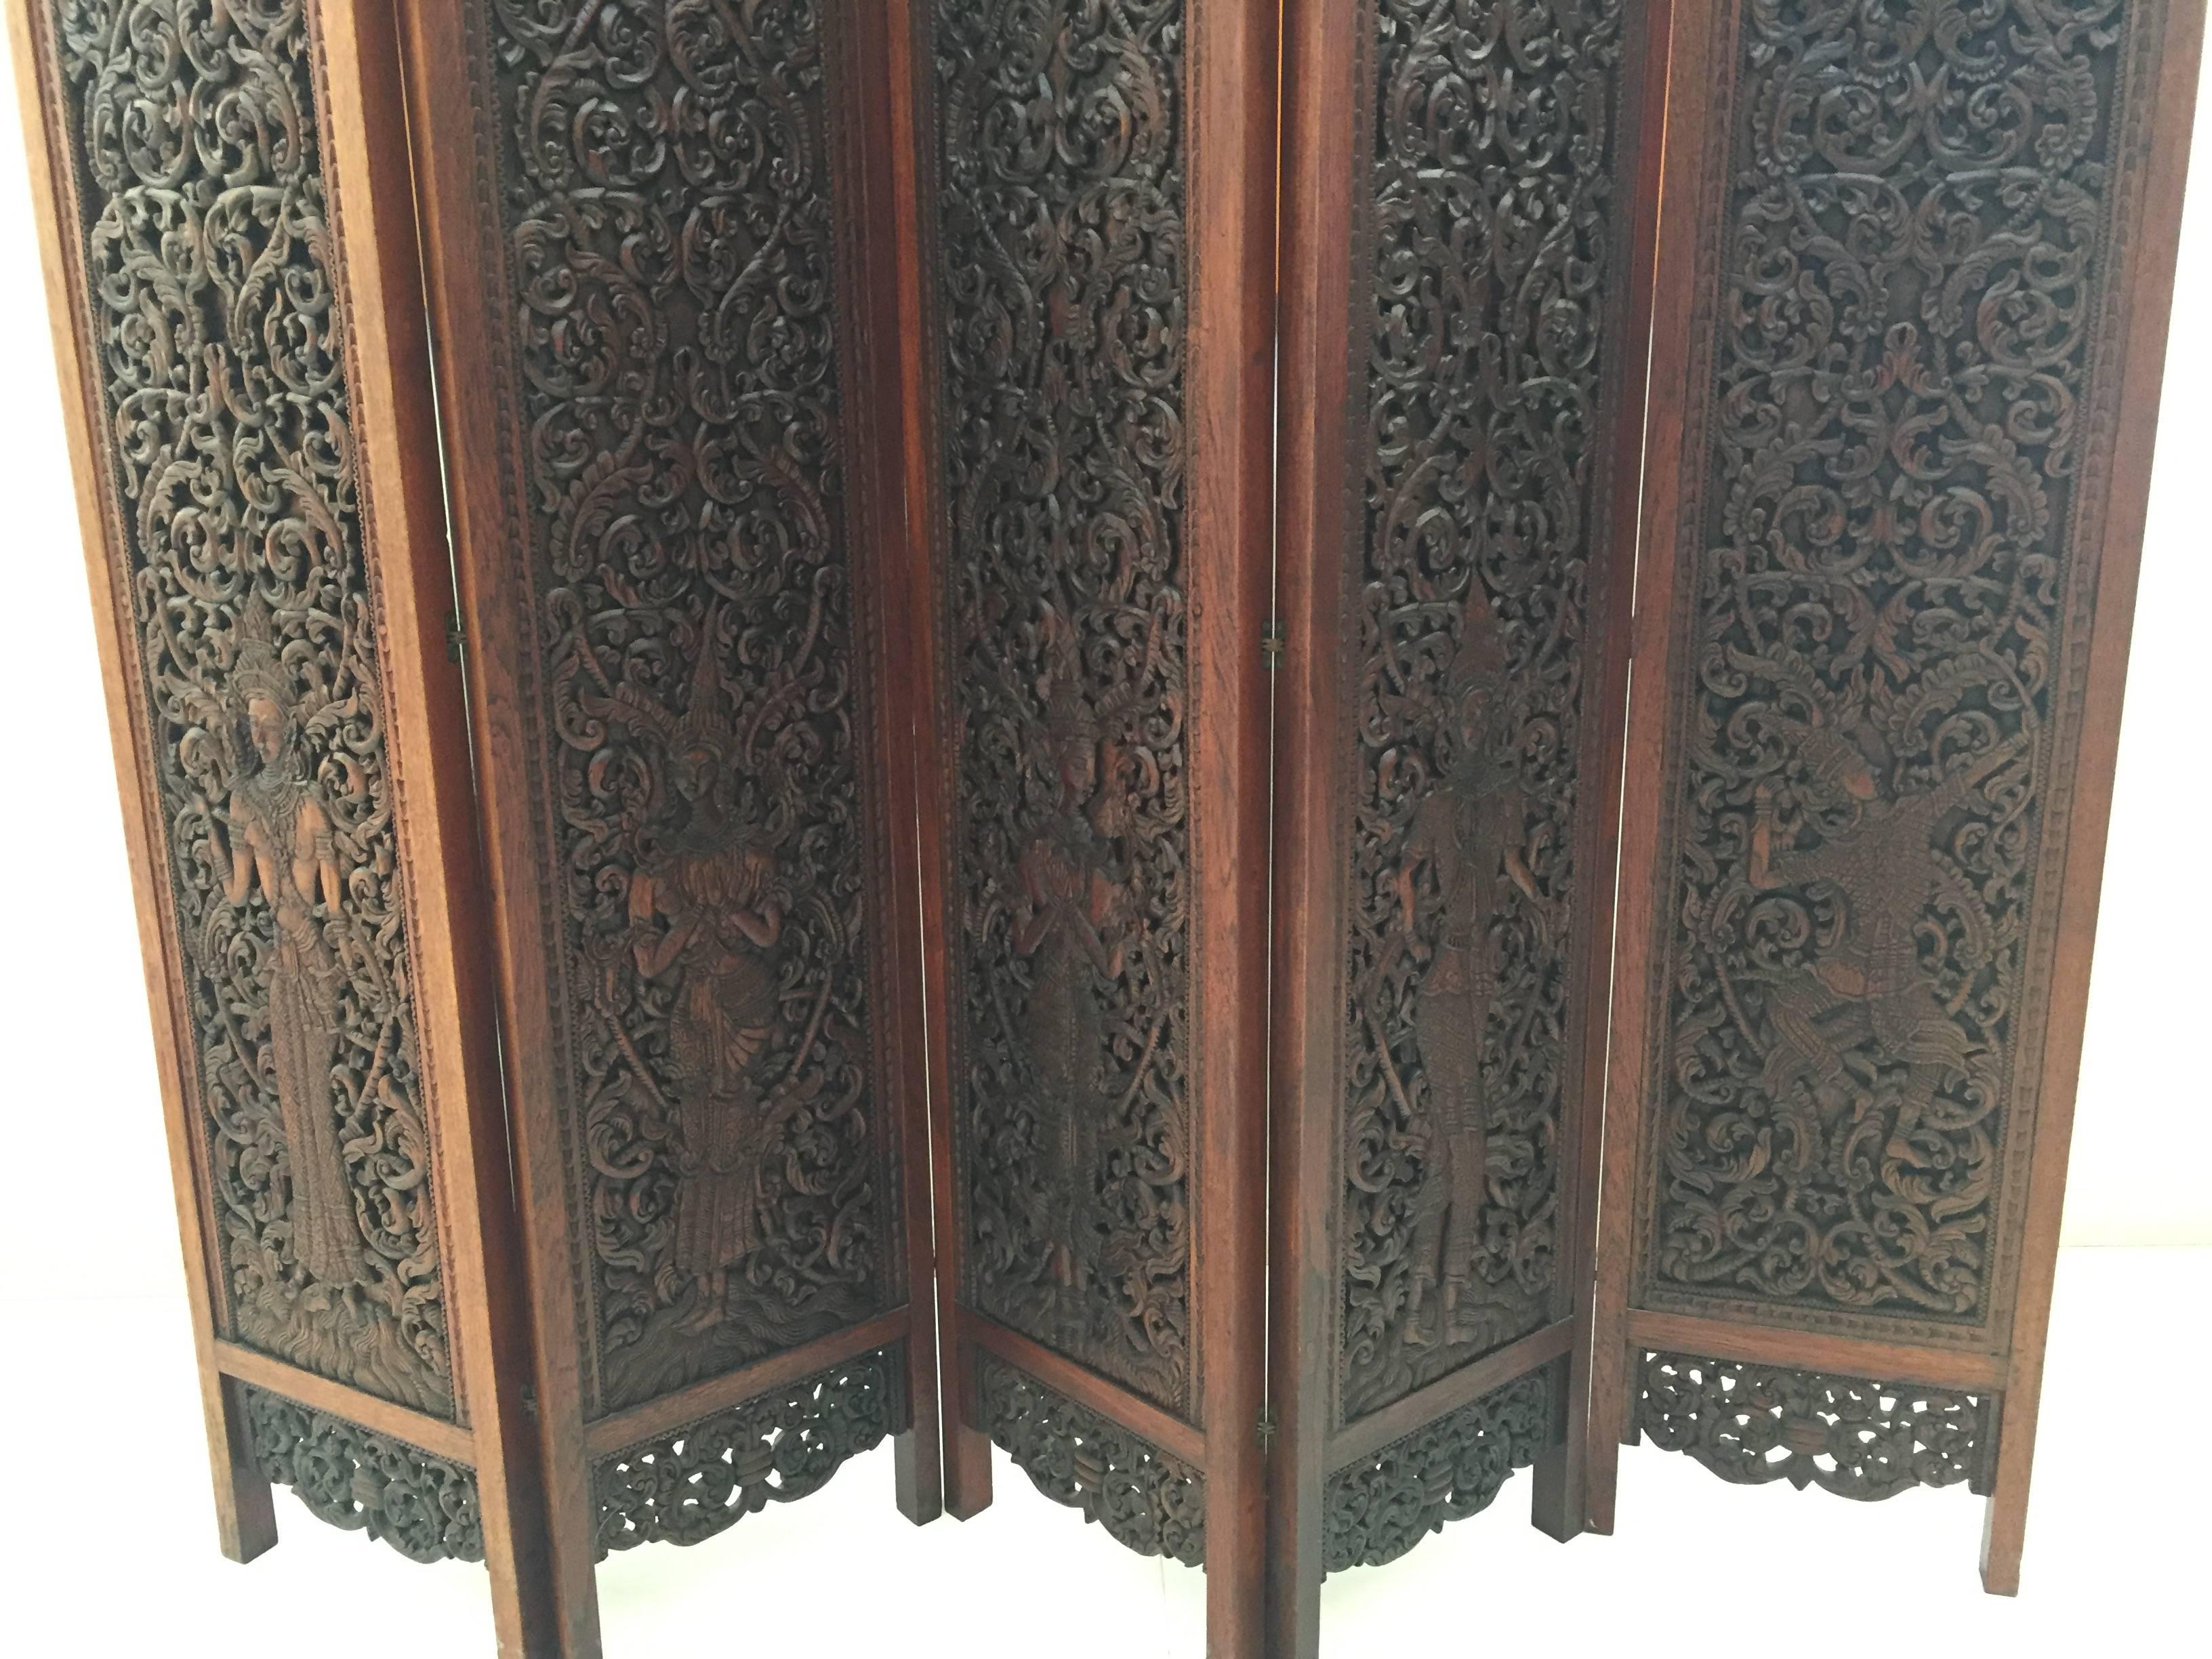 20th Century Asian Hand-Carved Wood Five Panels Double-Sided Folding Screen Room Divider